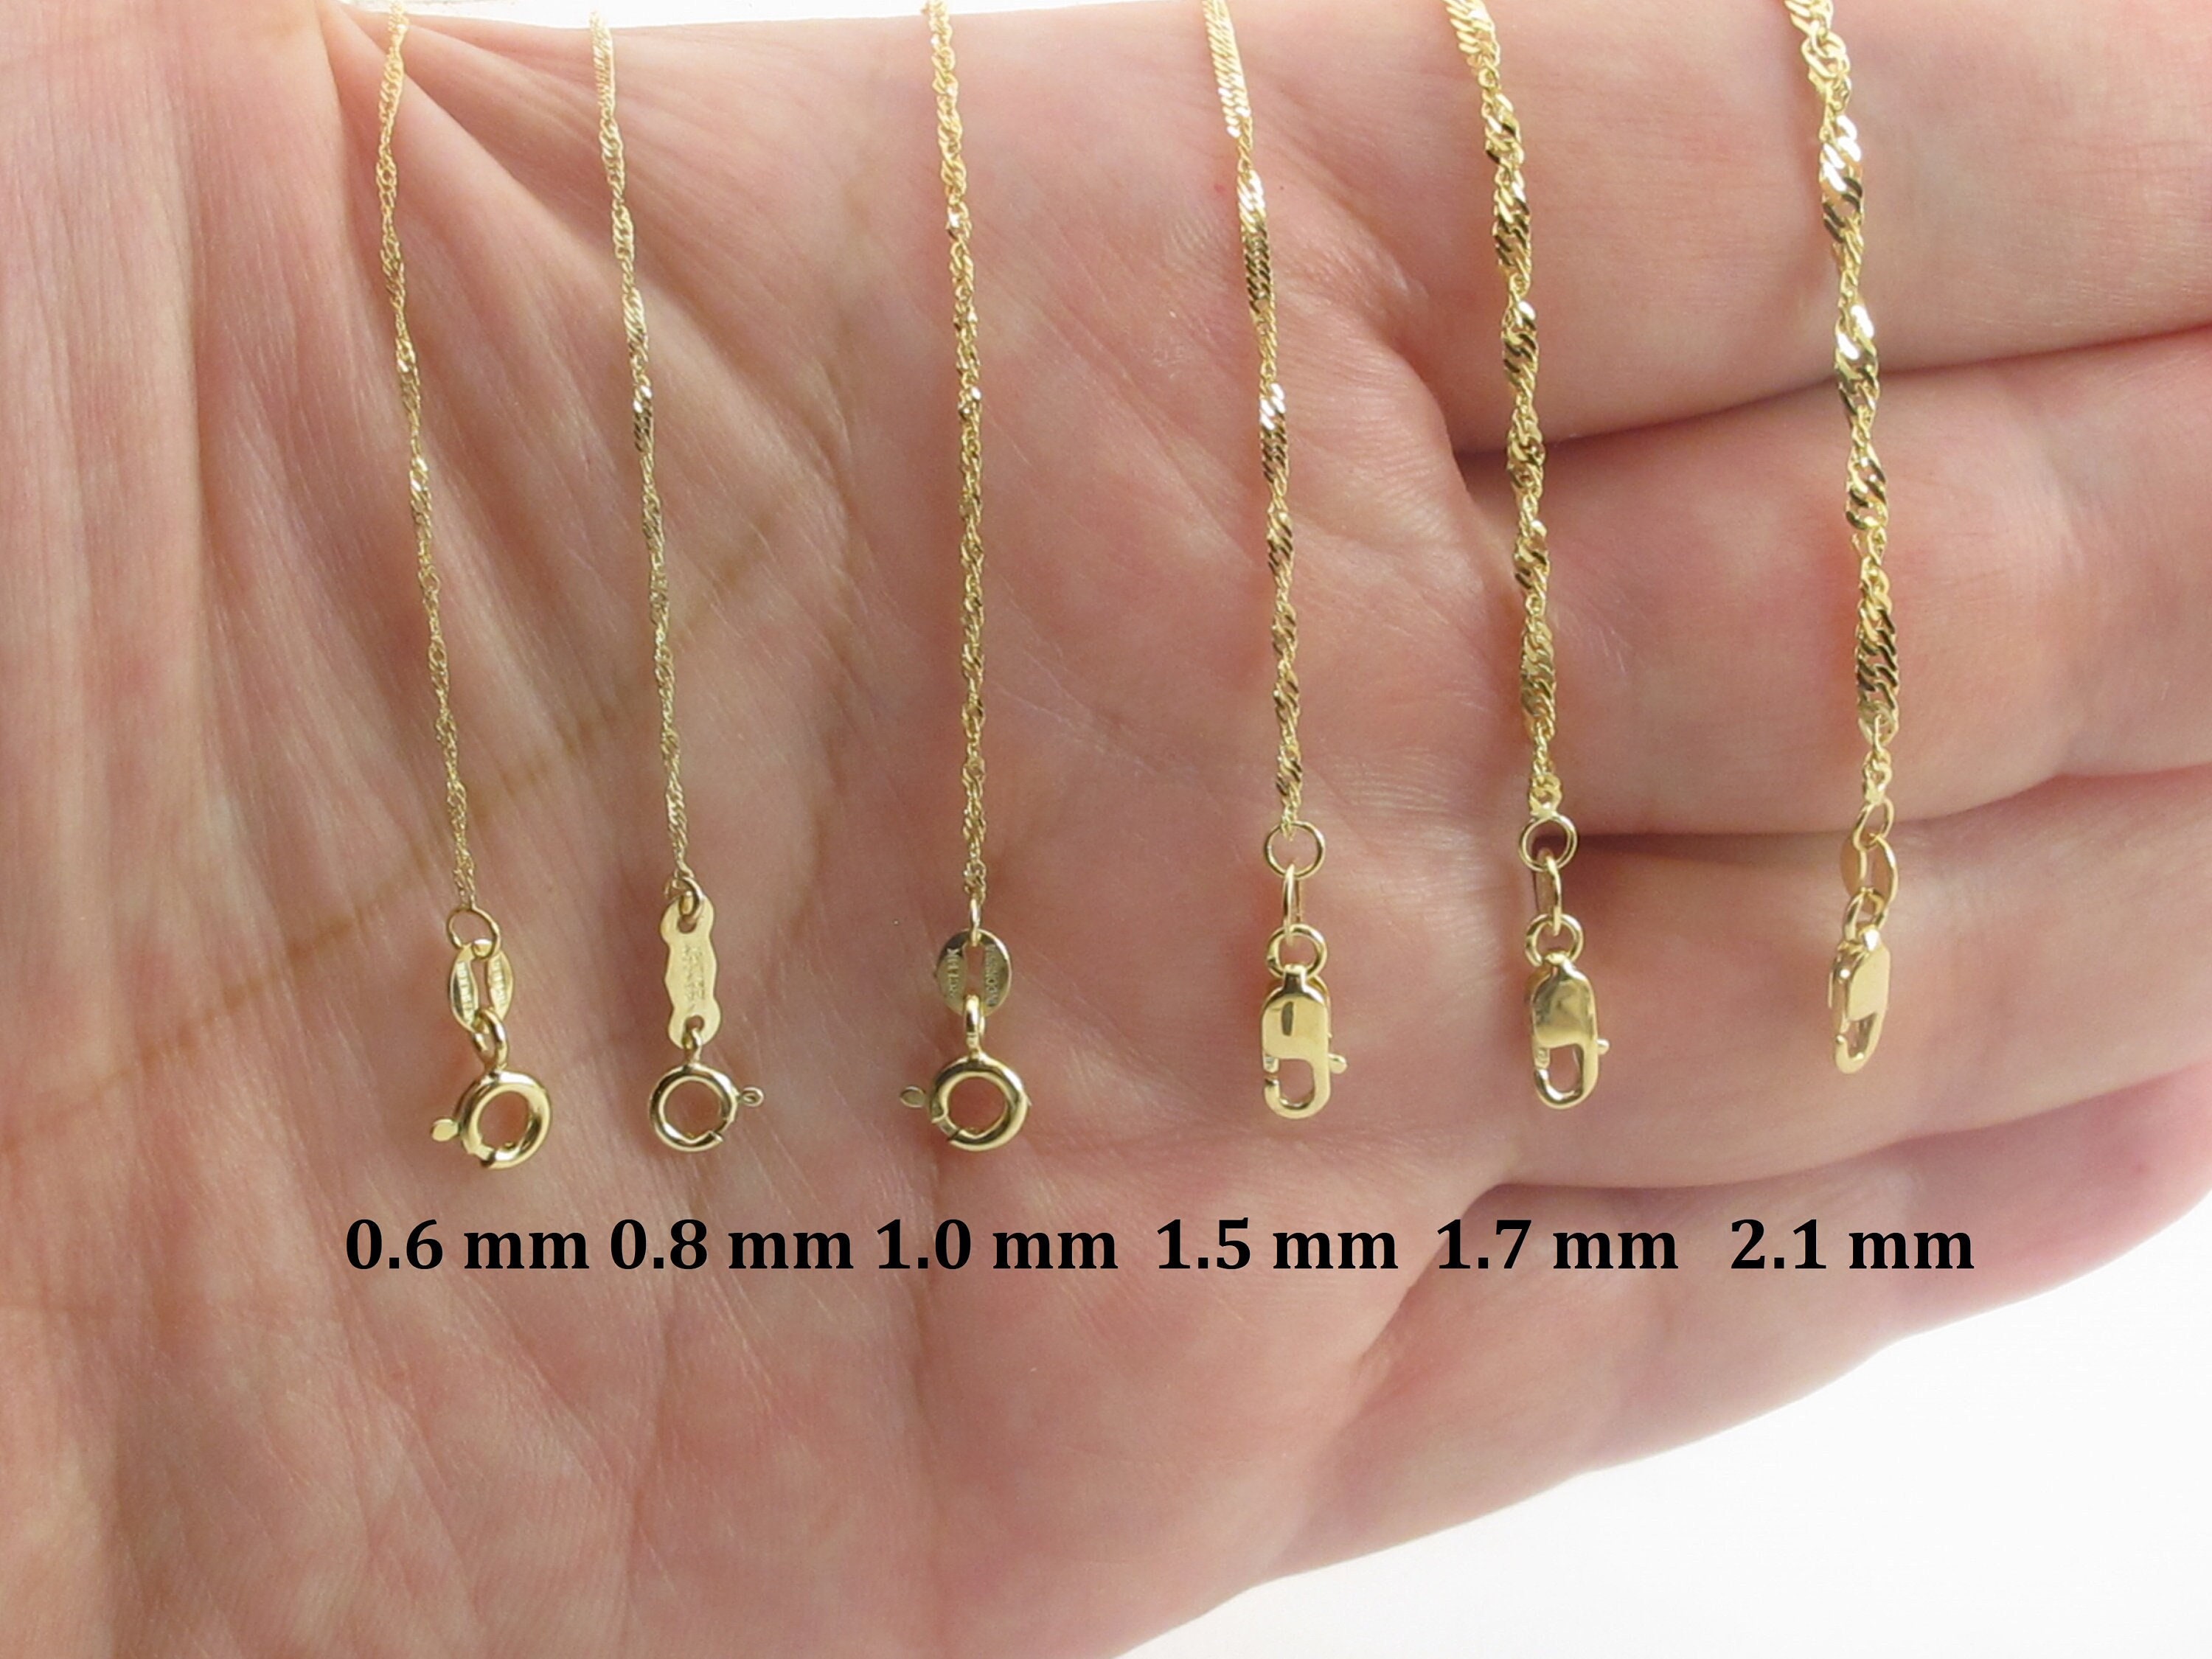 Singapore Chain 14k Yellow Gold Necklace 16, 18, 20, 22, 24 0.6 mm